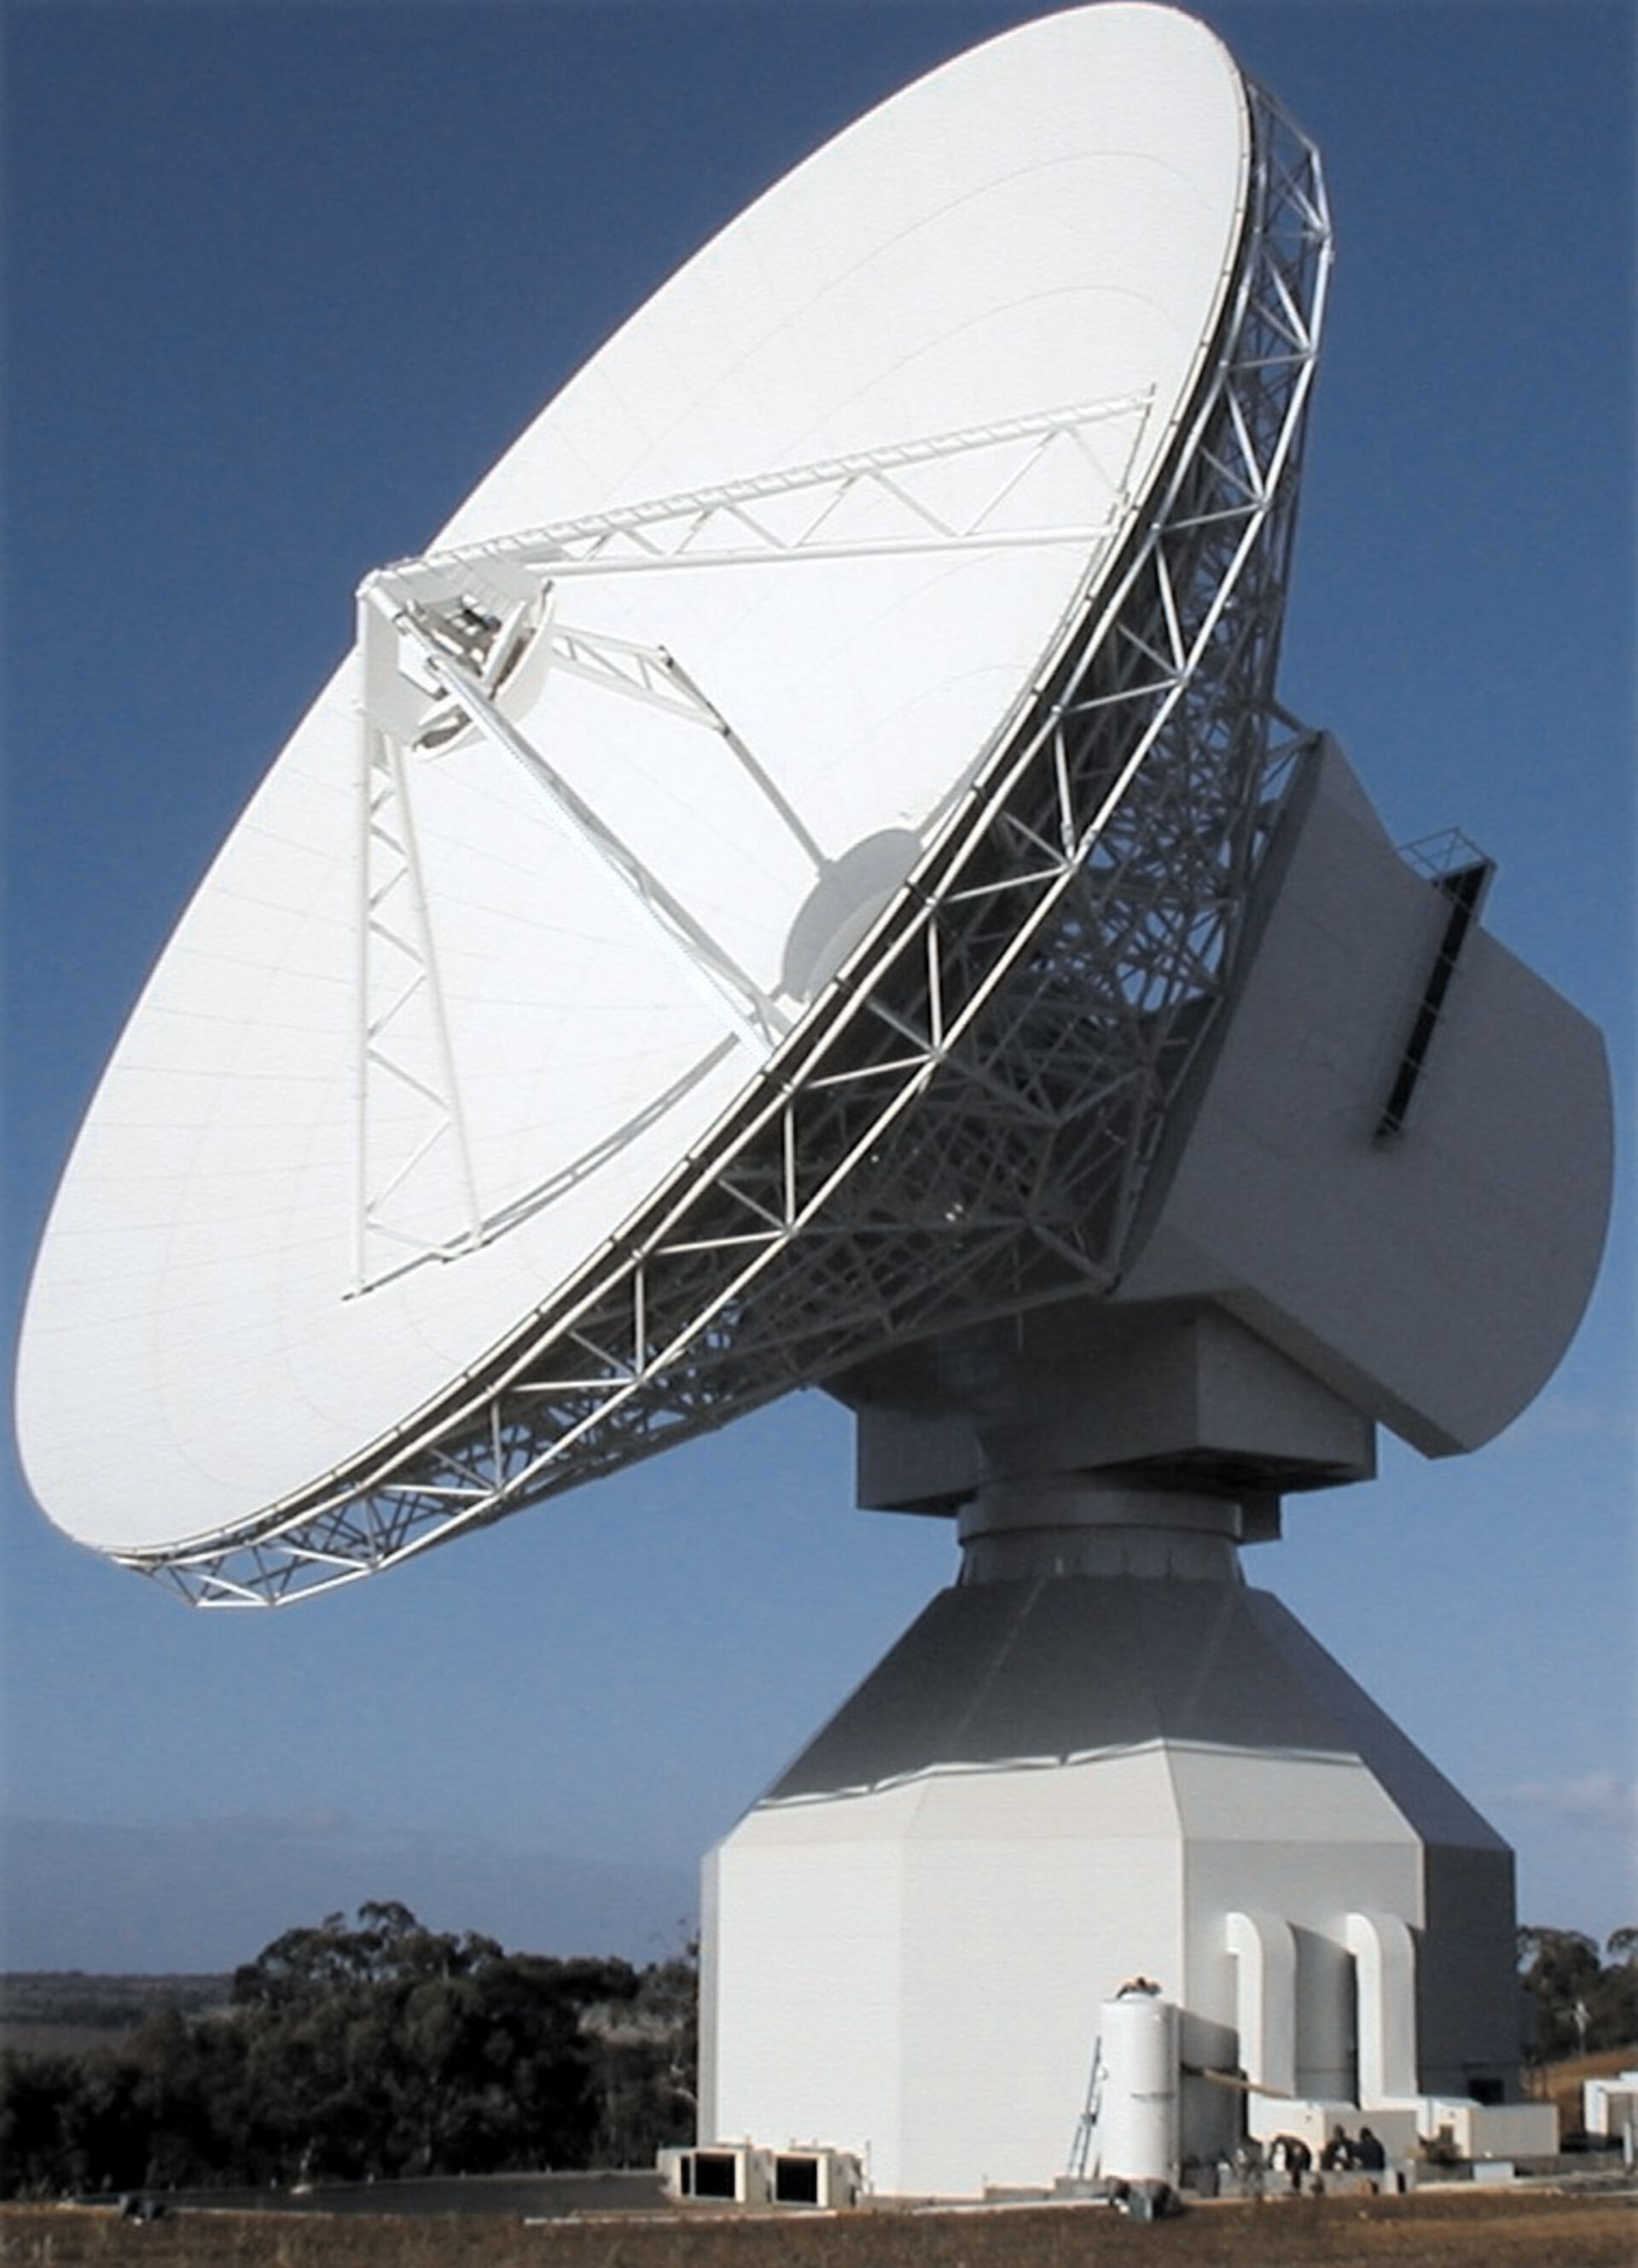 The antenna in New Norcia